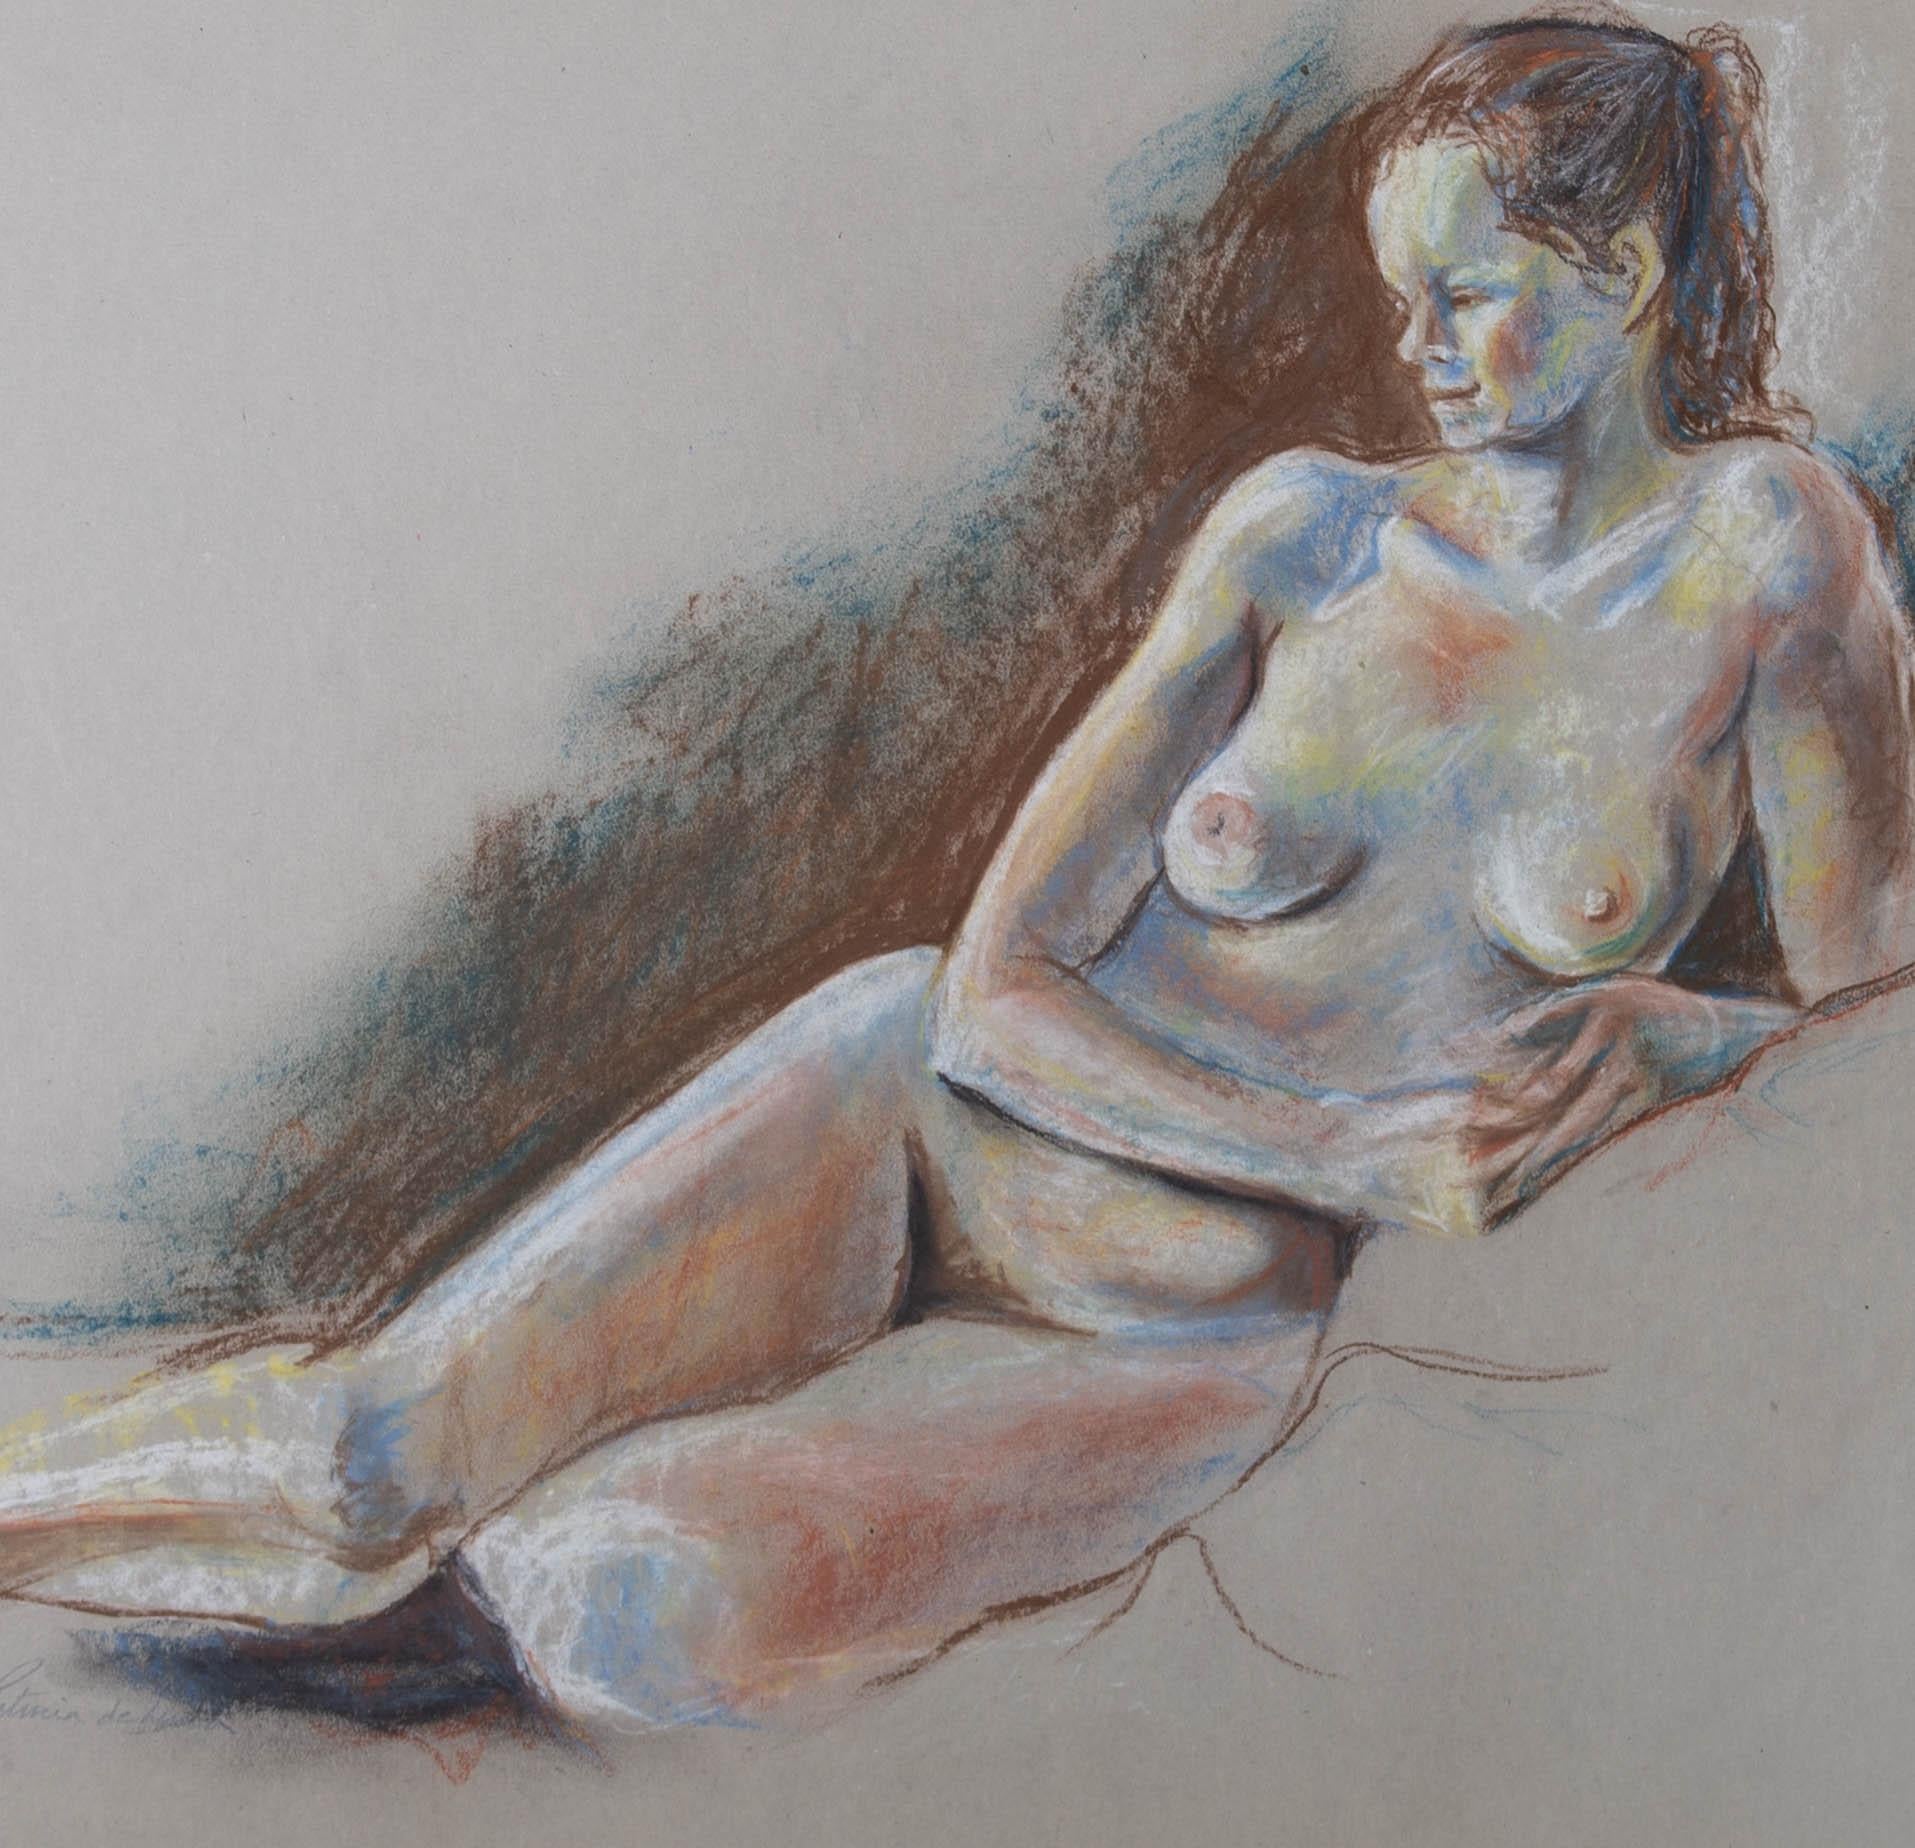 A delightful pastel study of a nude model reclining onto a soft surface. The artist has used shades of blue and red in expressive markings to capture the model's features. Signed to the lower left. Well presented in a card mount. On wove.